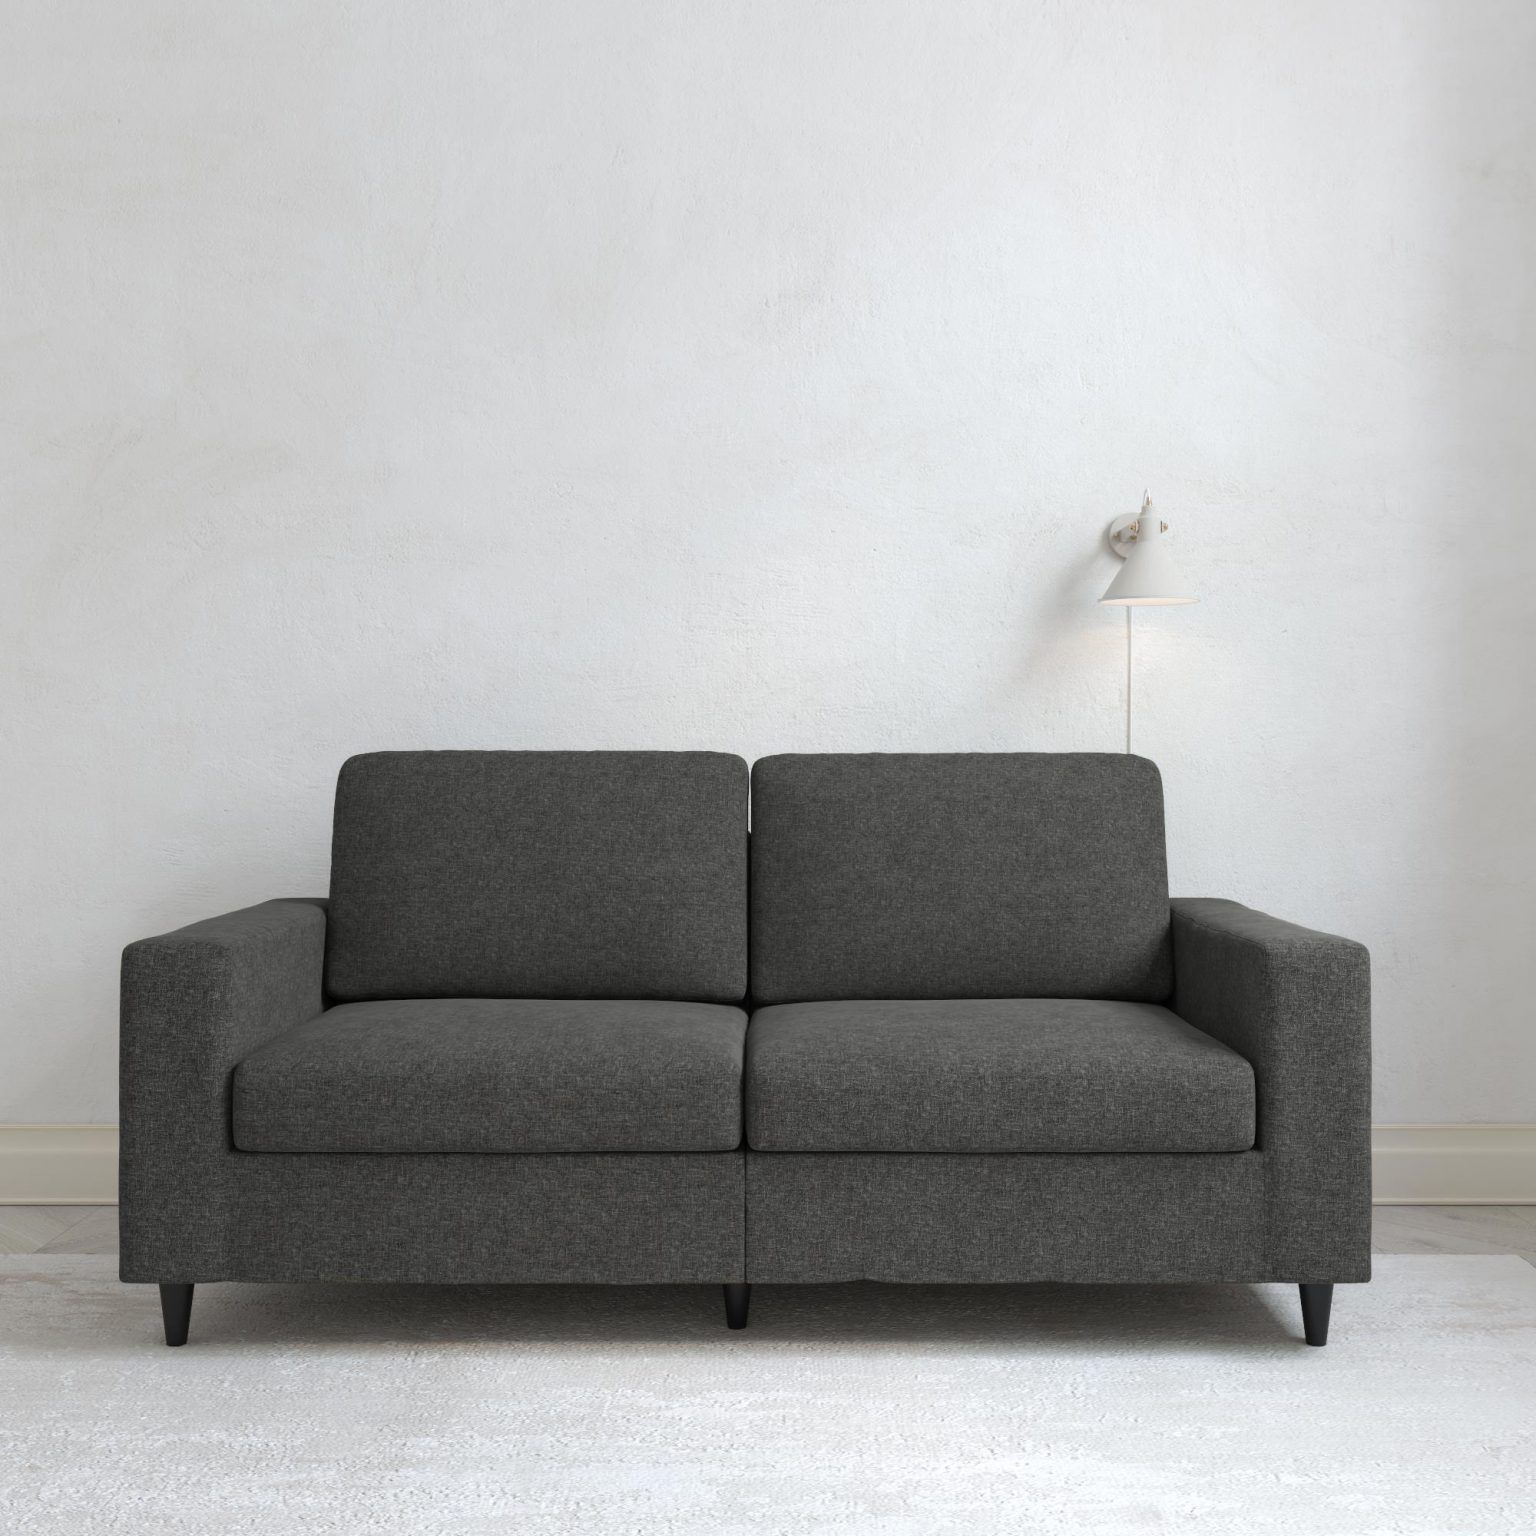 Dhp Cooper Sofa, Gray Linen – Awzhome – The Best At Affordable Prices Regarding Gray Linen Sofas (Gallery 20 of 20)